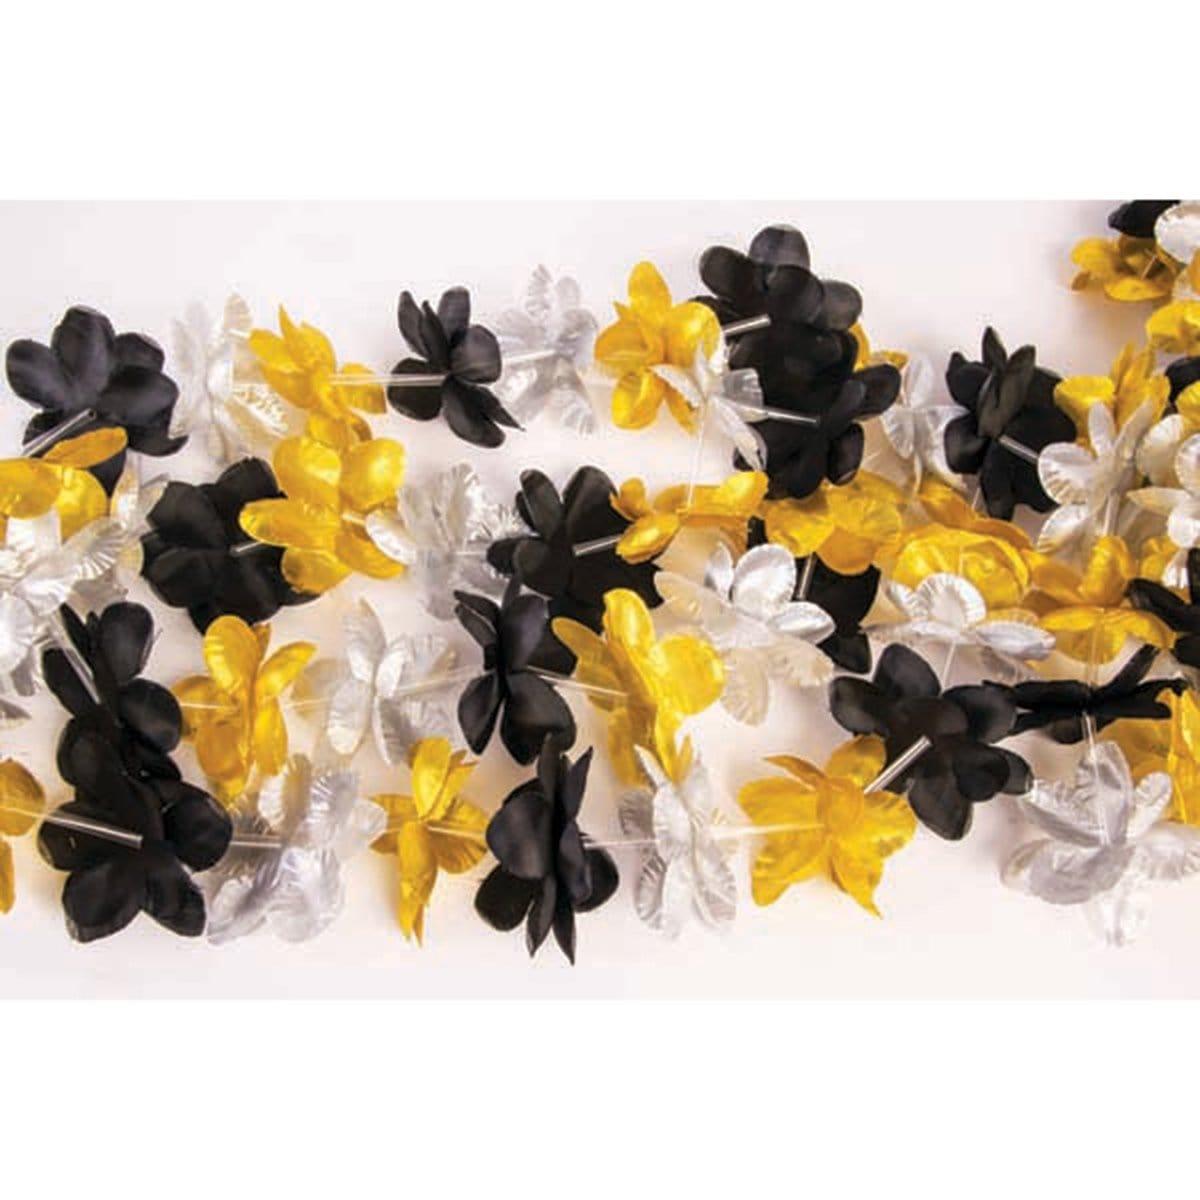 Buy Theme Party Black, Gold & Silver Flower Luau Garland sold at Party Expert